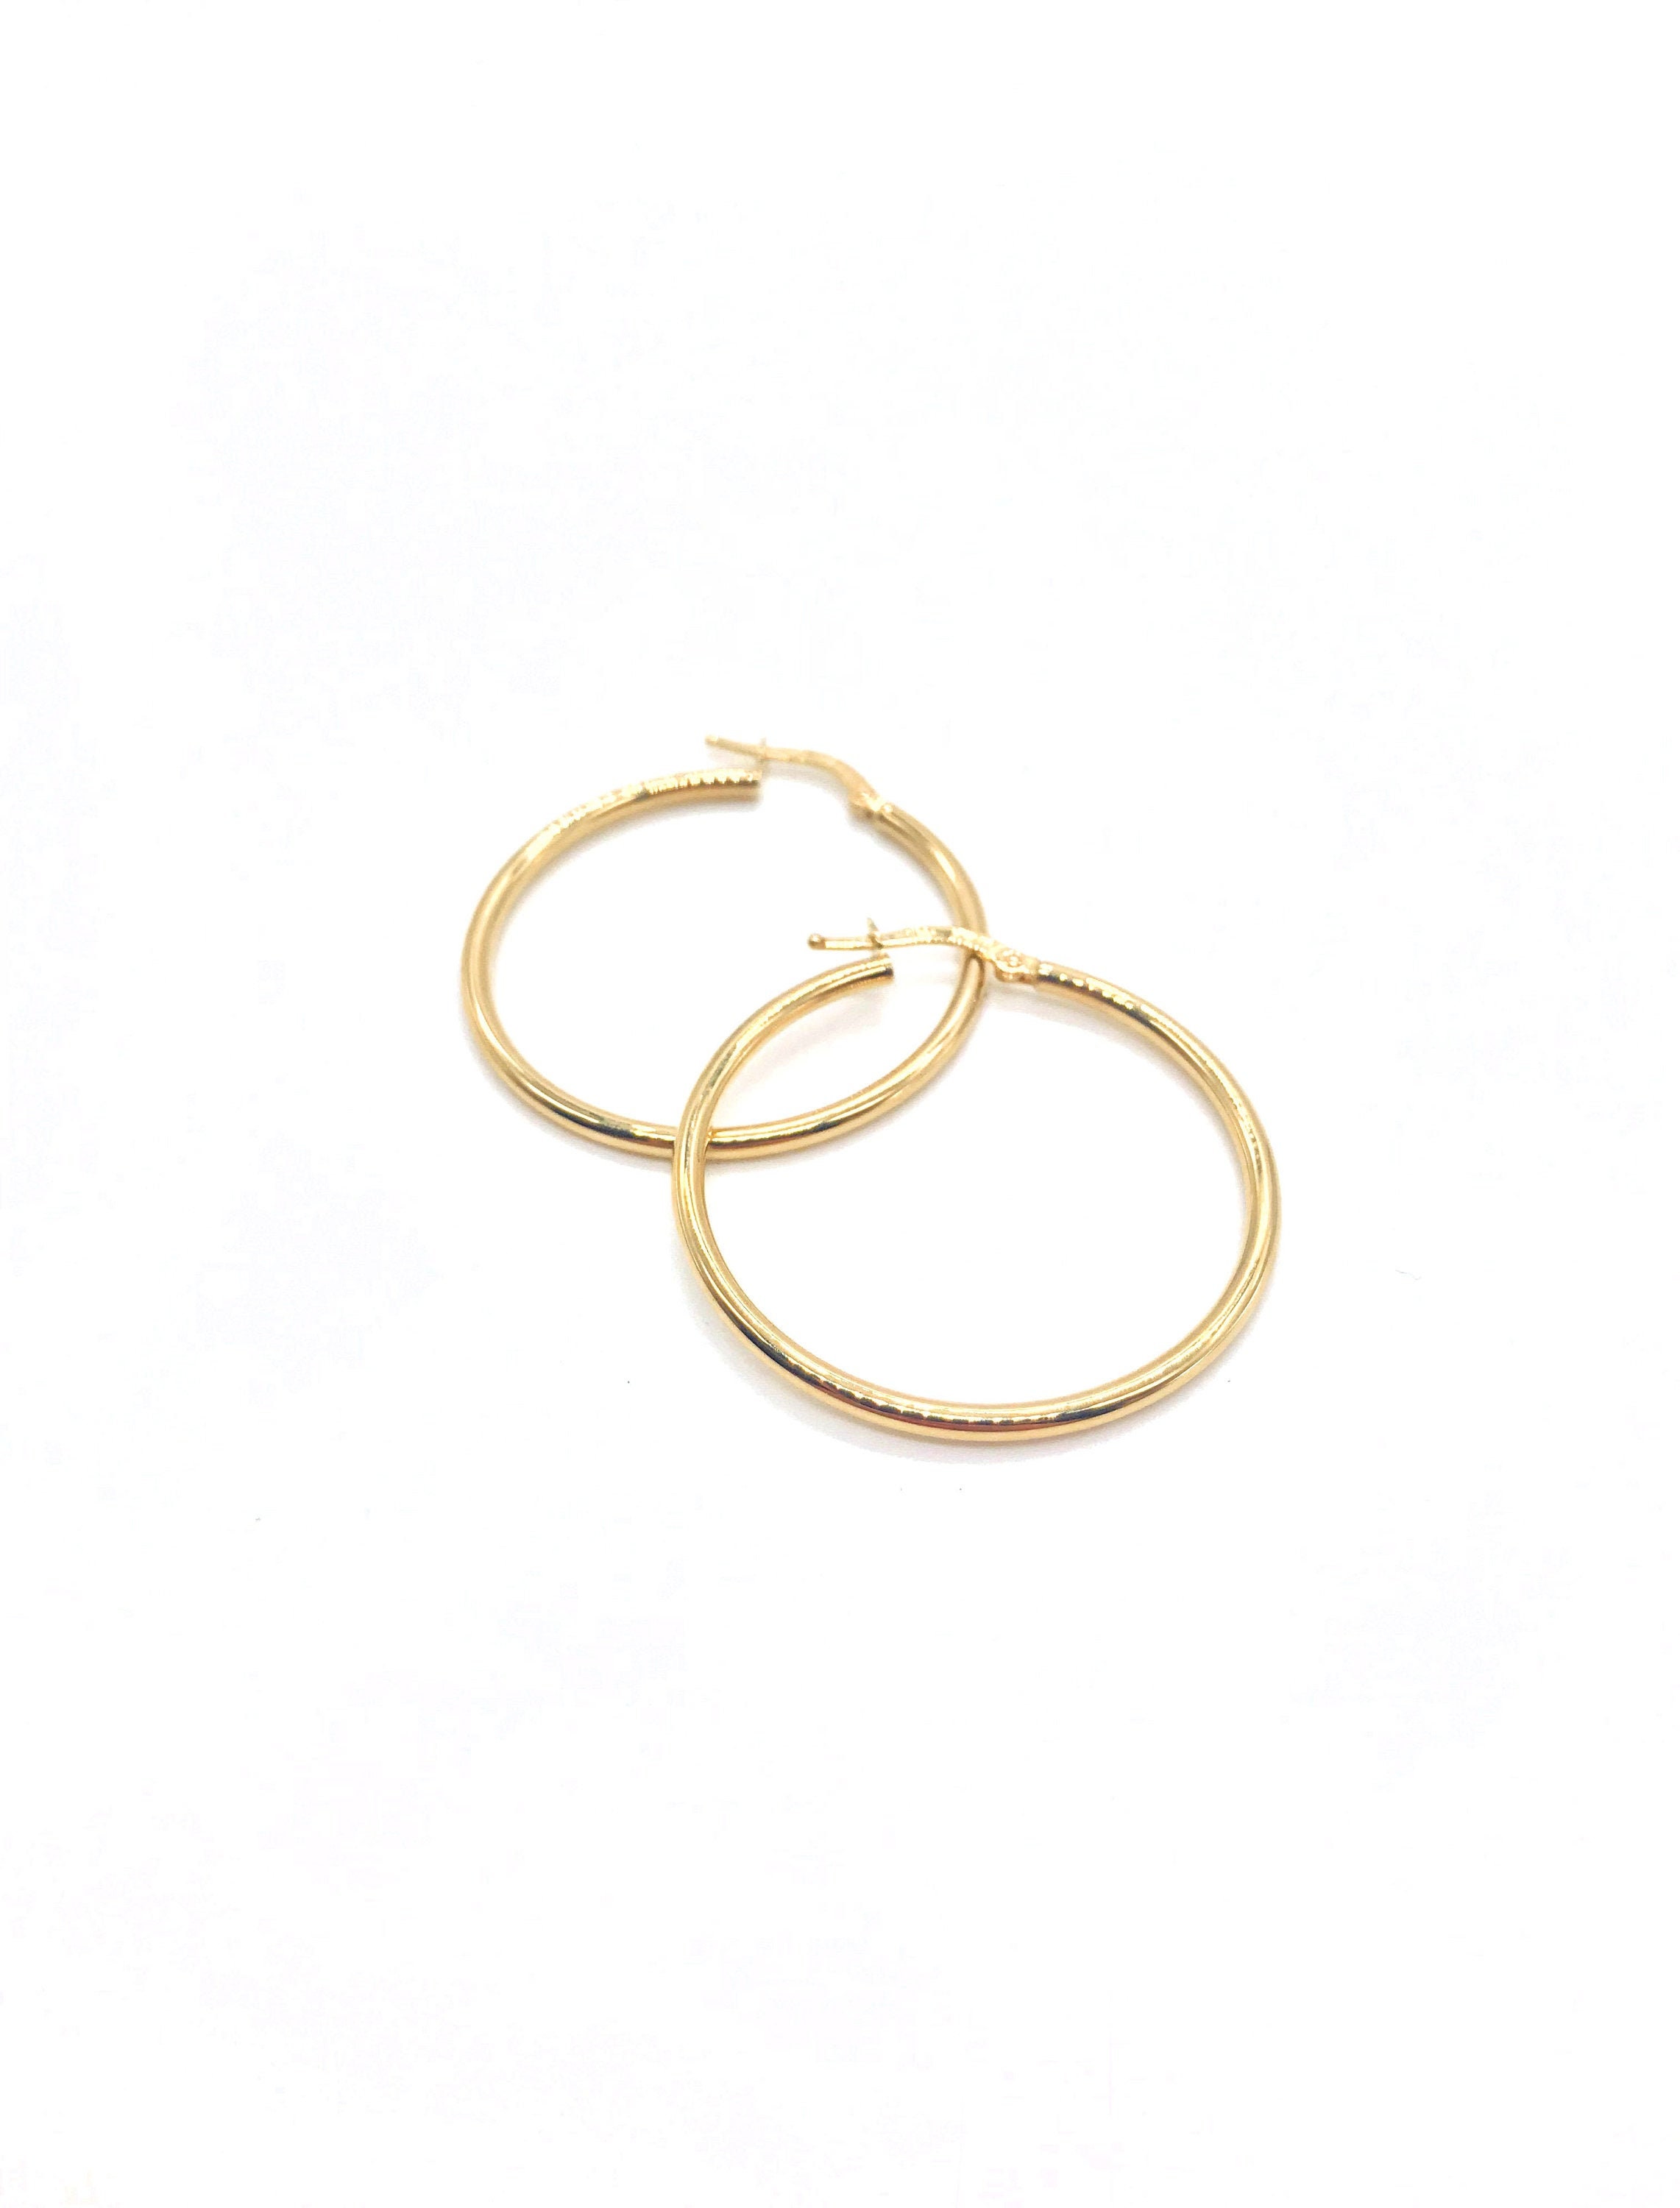 18K Yellow Gold Modern Hoop Earrings Hoops Polished Minimalist Classic Thin Gift For Her Made in Italy